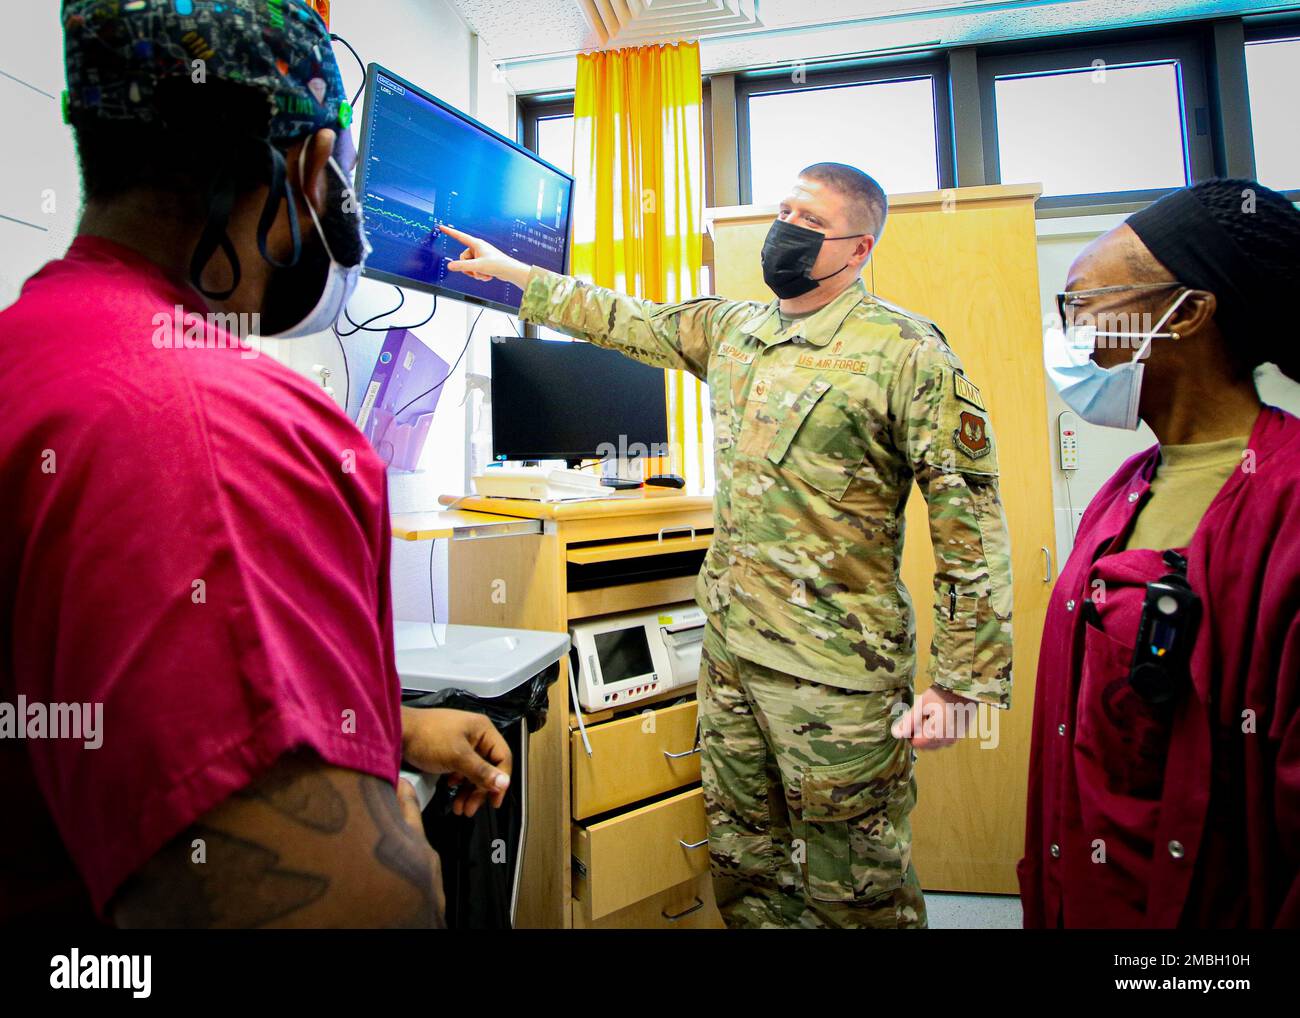 U.S. Air Force Master Sgt. Caige Chapman, noncommissioned officer in charge, Labor, Delivery, Recovery, Postpartum Unit, Landstuhl Regional Medical Center, discusses patient information to LDRP staff, June 15. Chapman, a native of Castroville, Texas, was recently recognized for his performance following a last-minute deployment in support of the 435th Contingency Response Group to Poland. Stock Photo